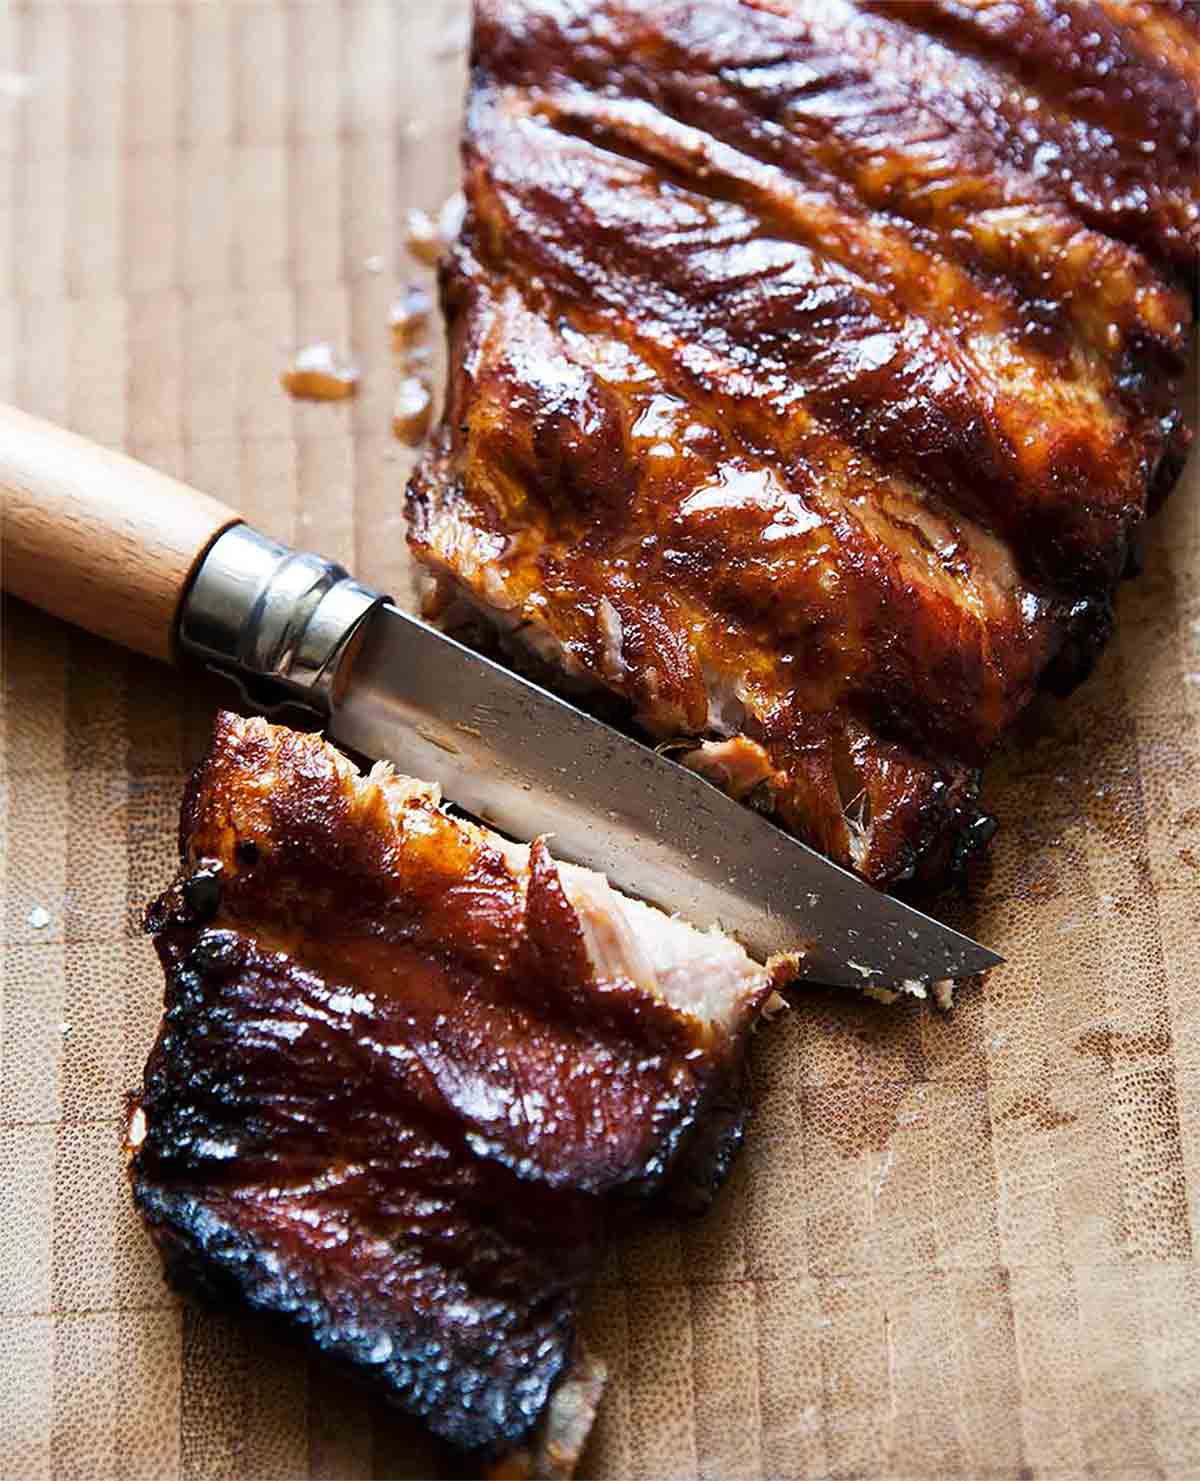 A knife cutting into a slab of pressure cooker ribs on a wooden board.